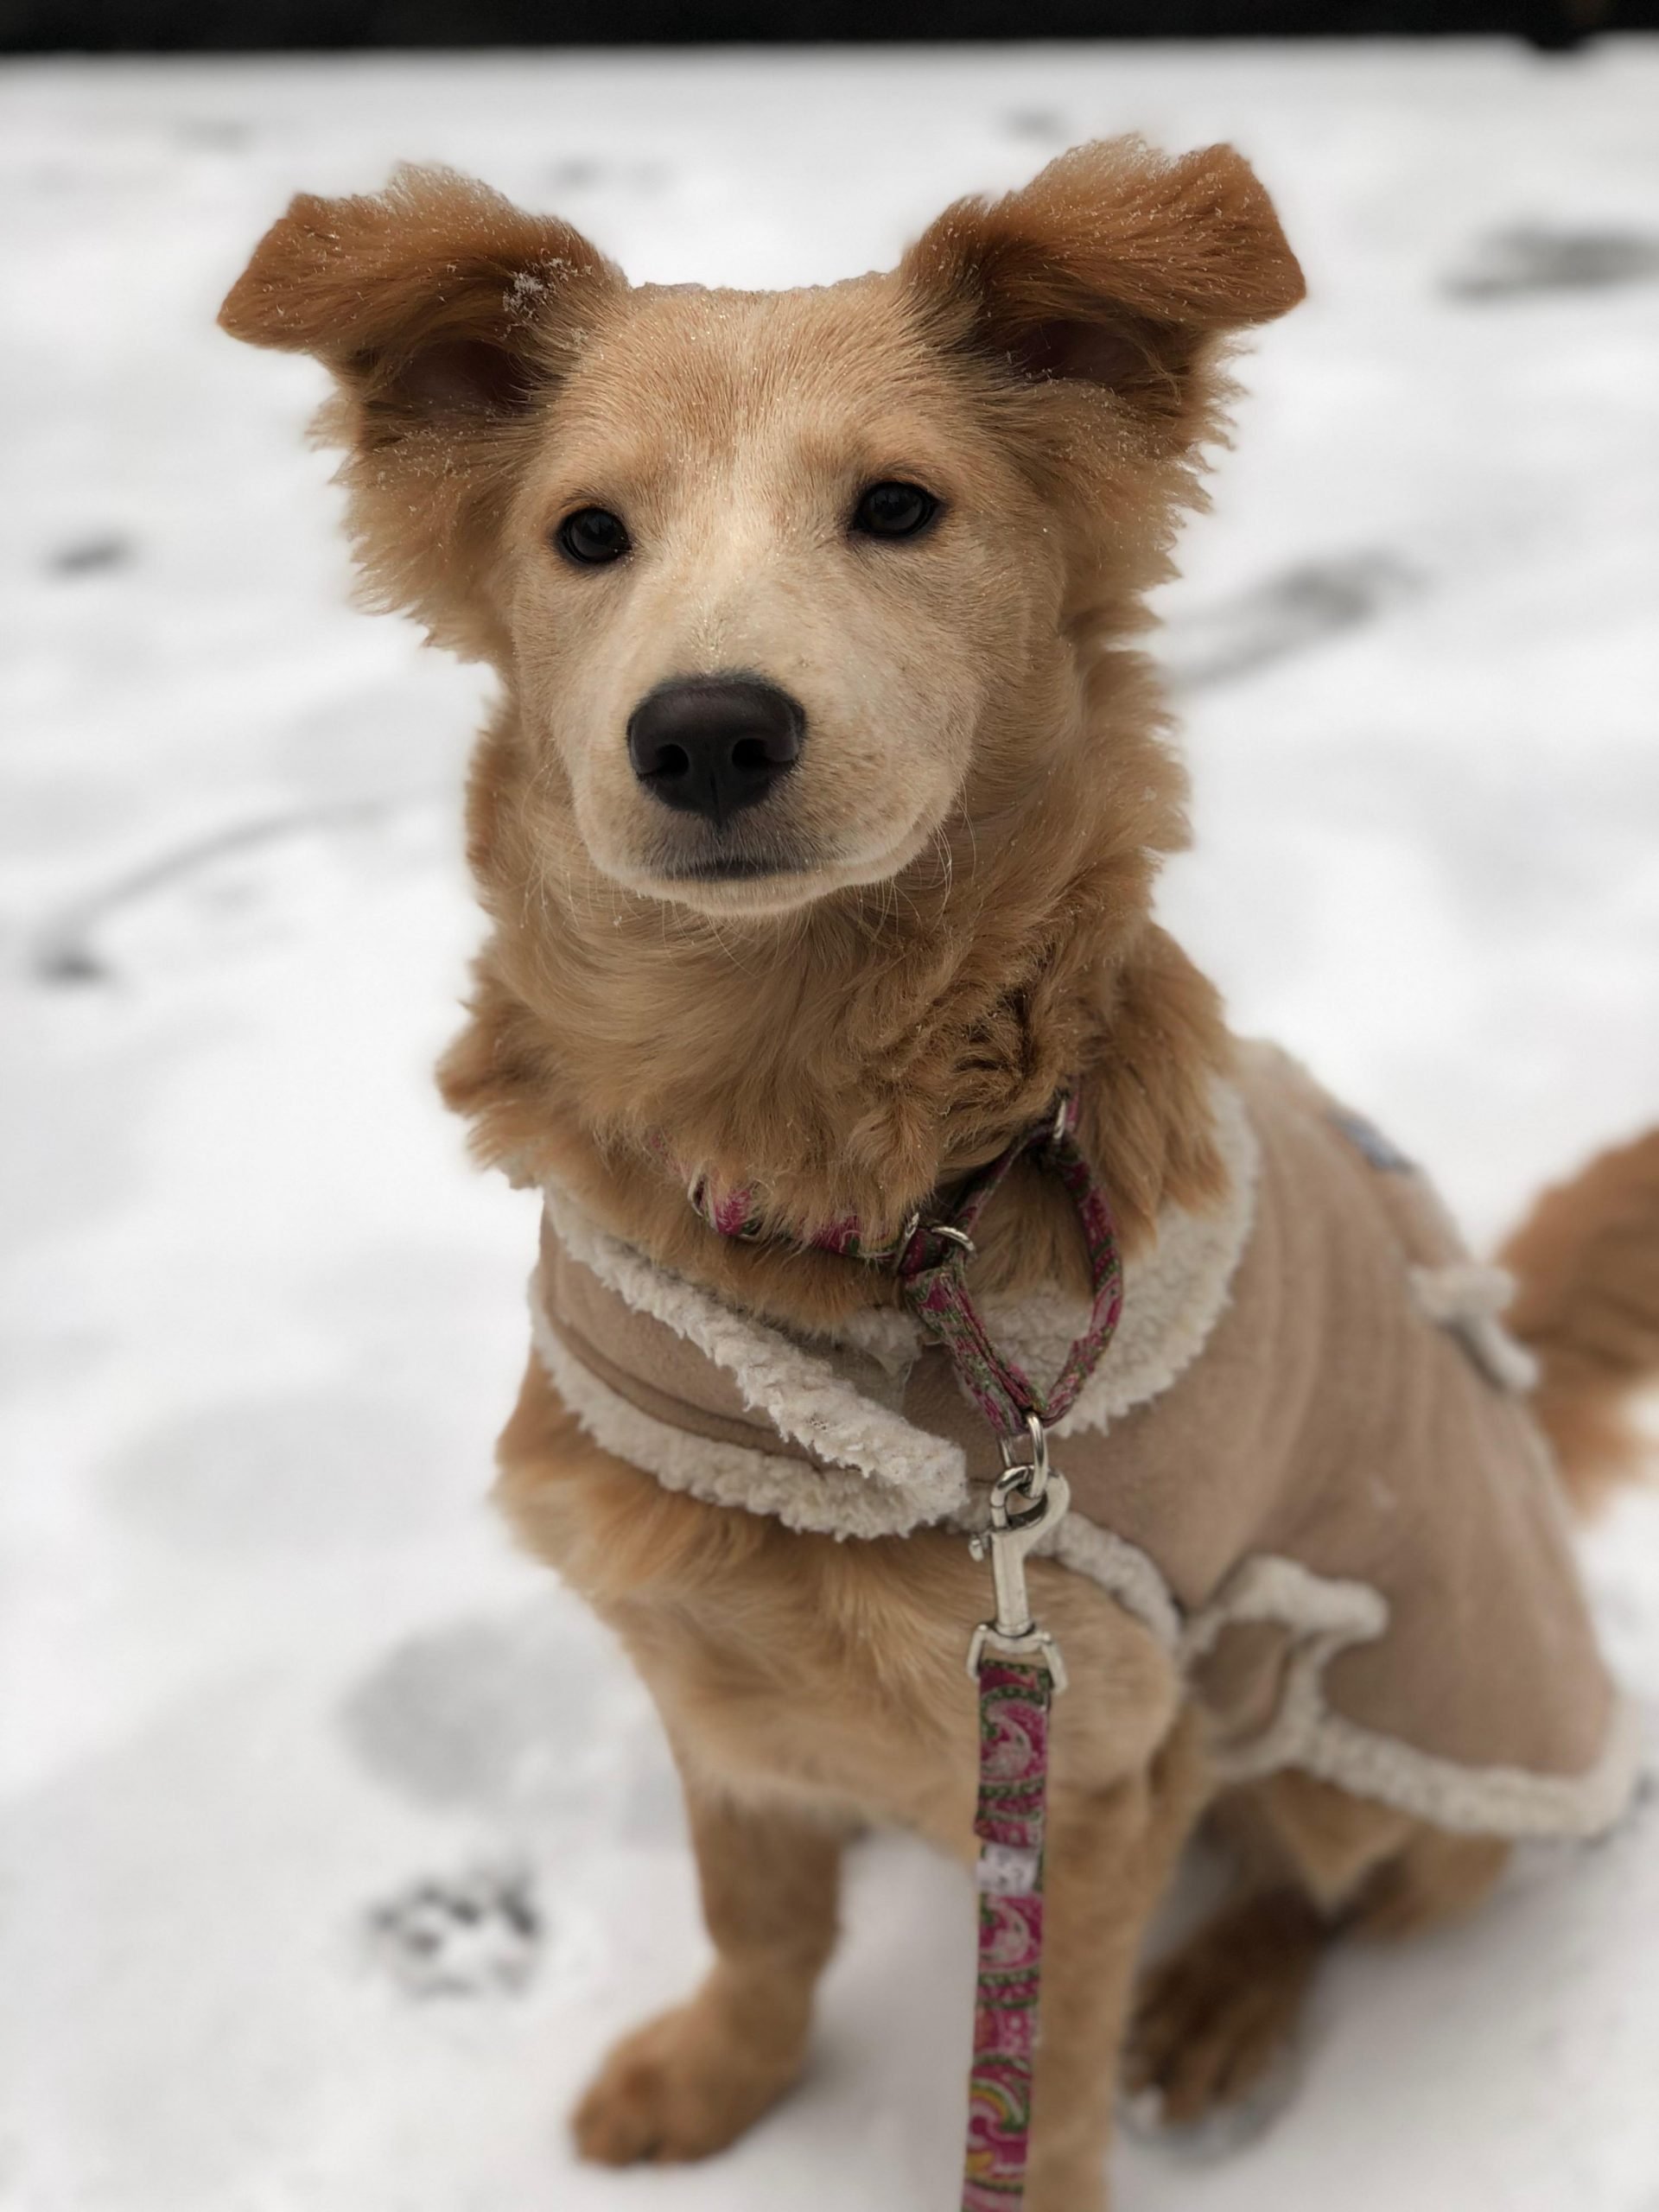 Was told she was a Chow/Golden Retriever Mix. I have ...